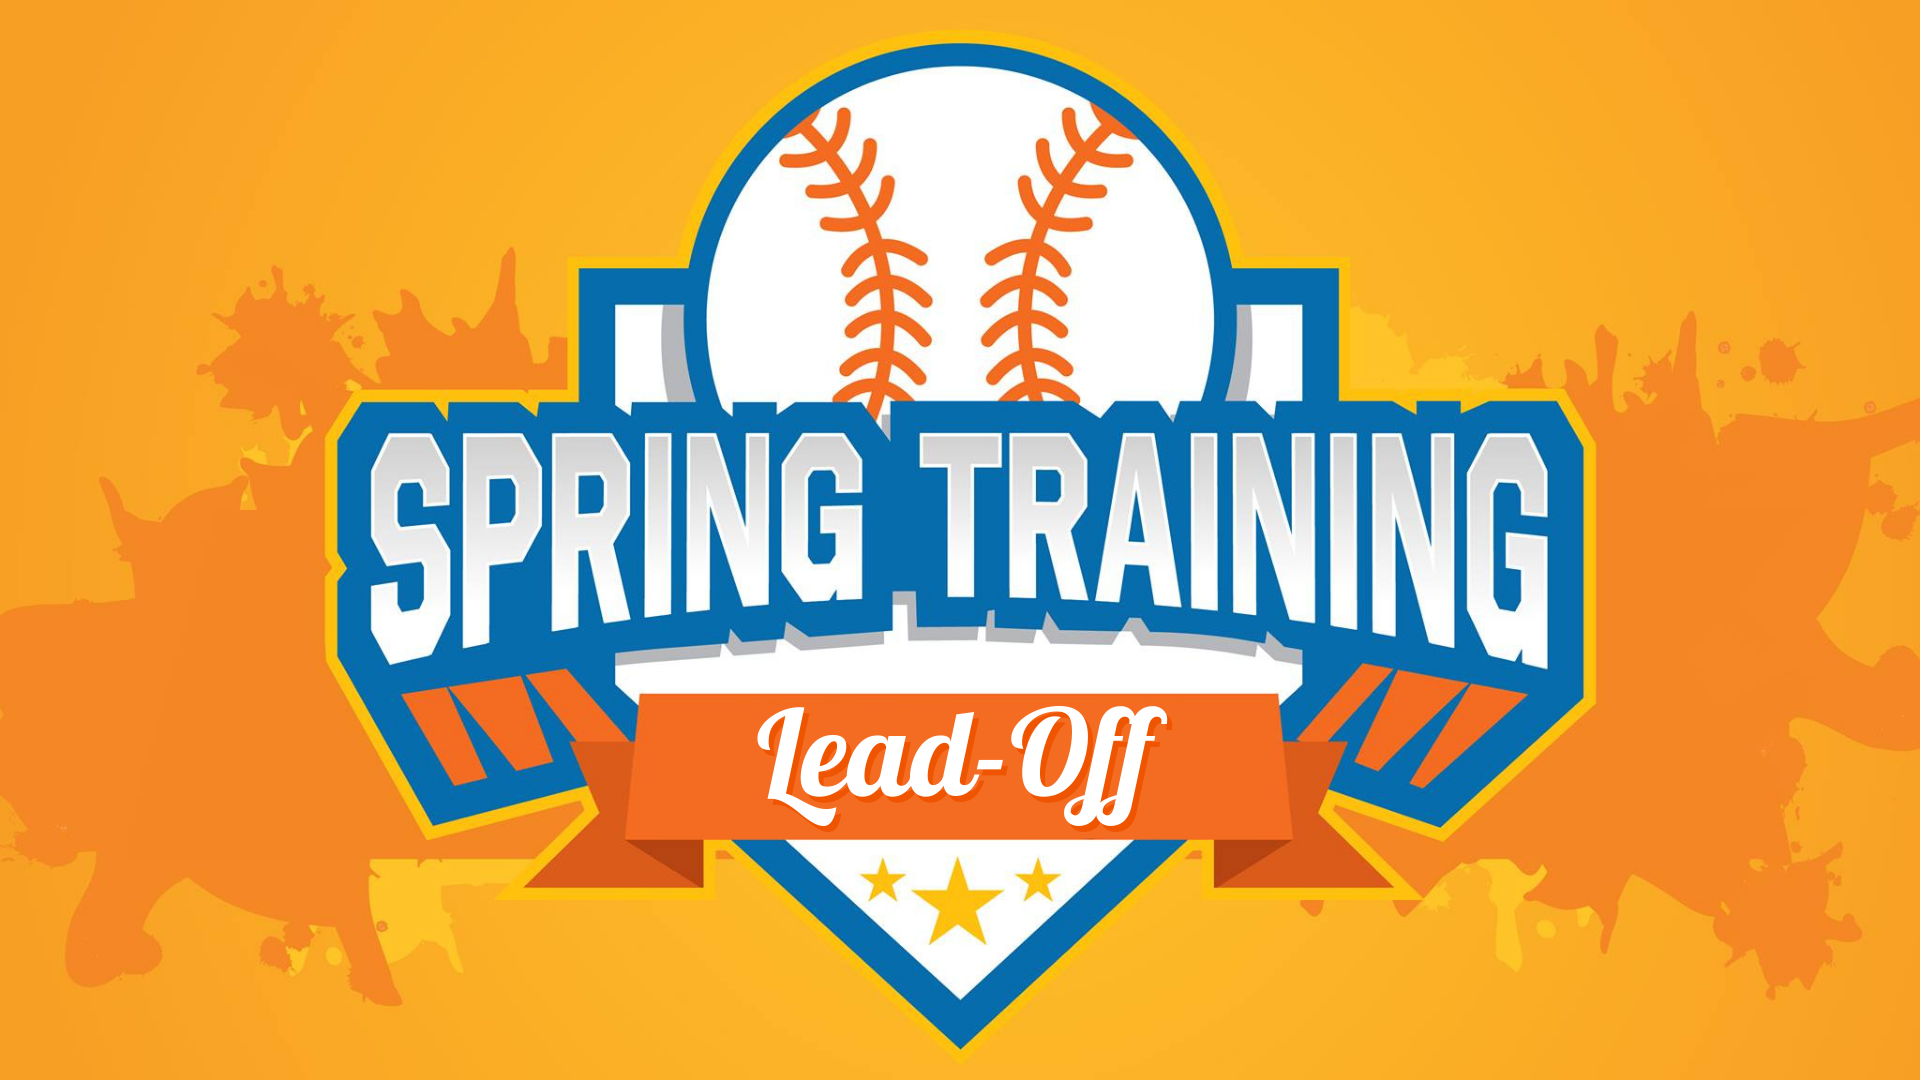 Spring Training Lead-Off event